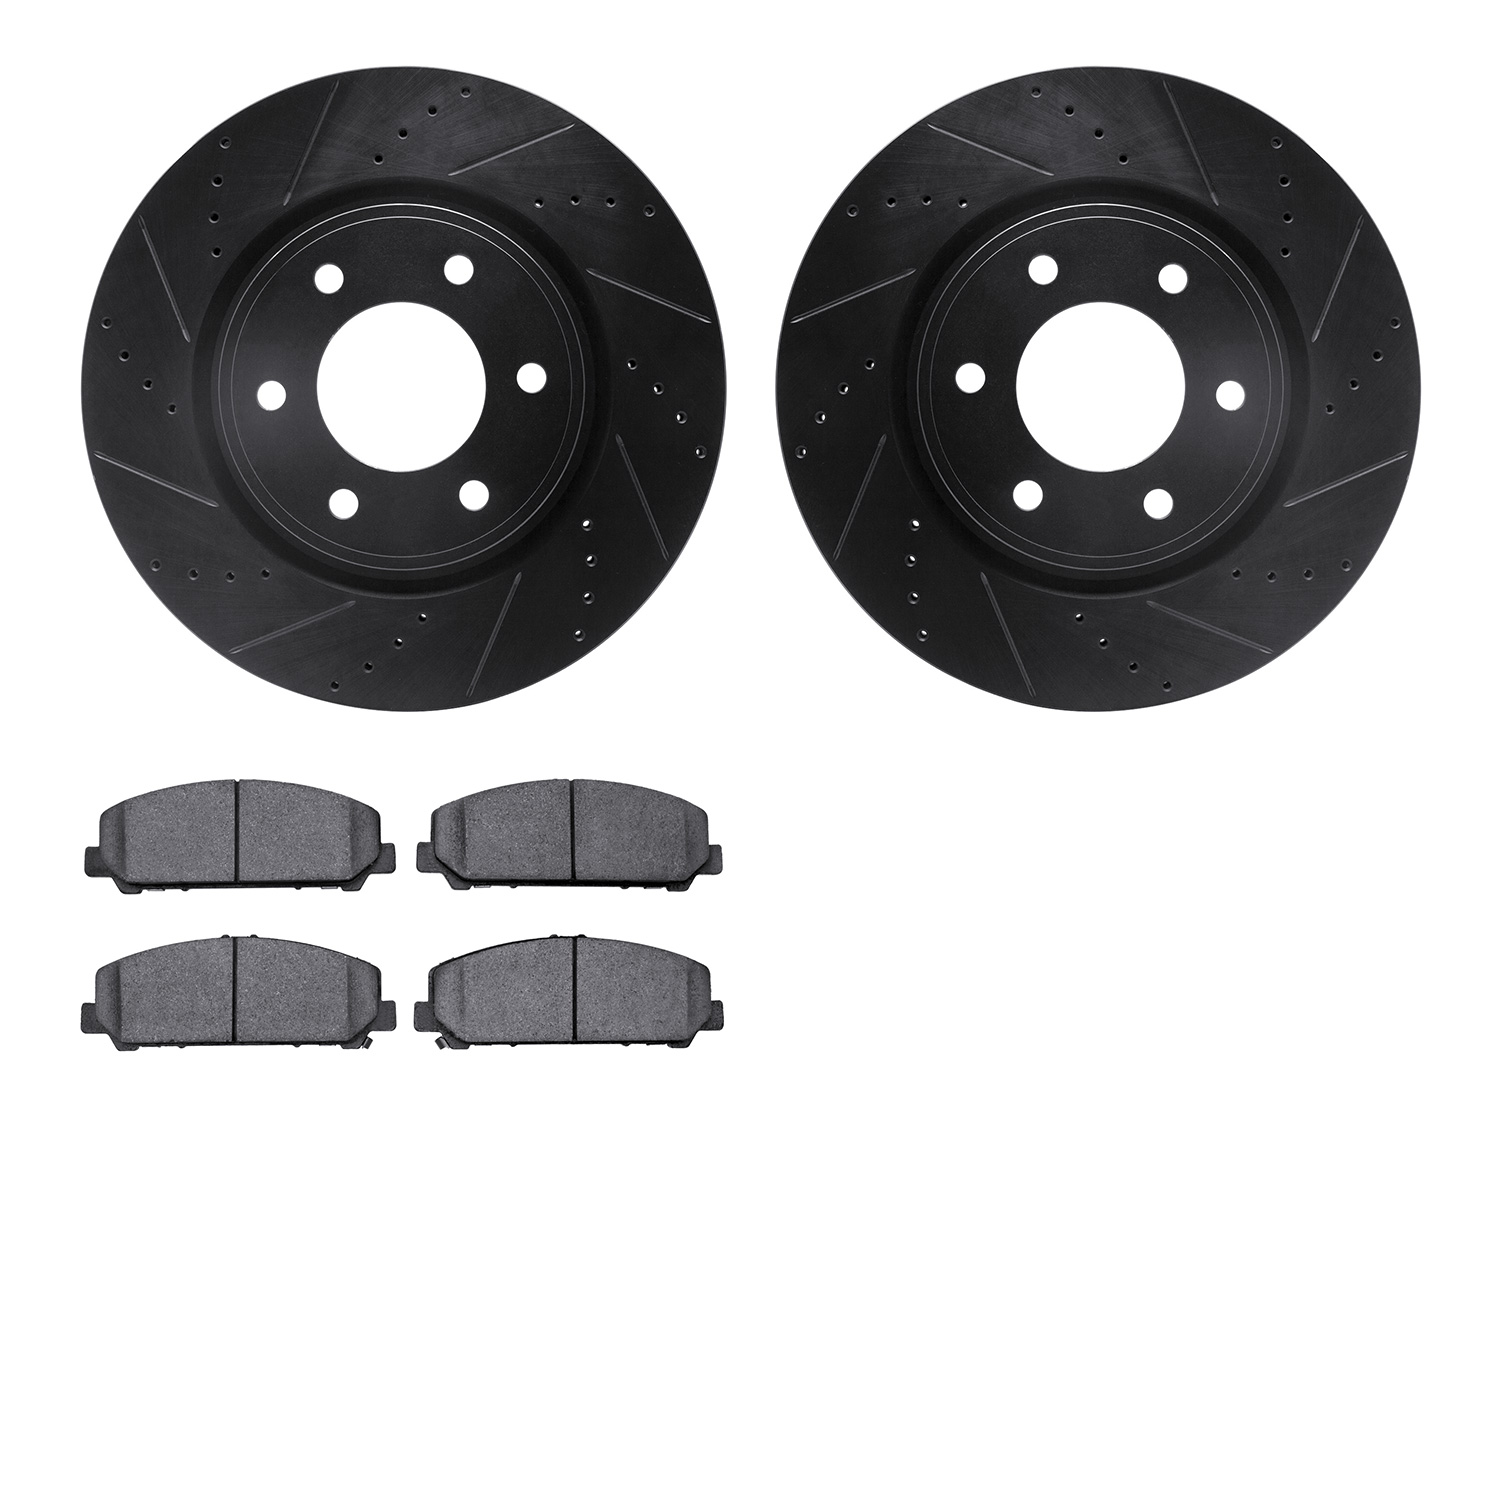 8302-68018 Drilled/Slotted Brake Rotors with 3000-Series Ceramic Brake Pads Kit [Black], Fits Select Infiniti/Nissan, Position: